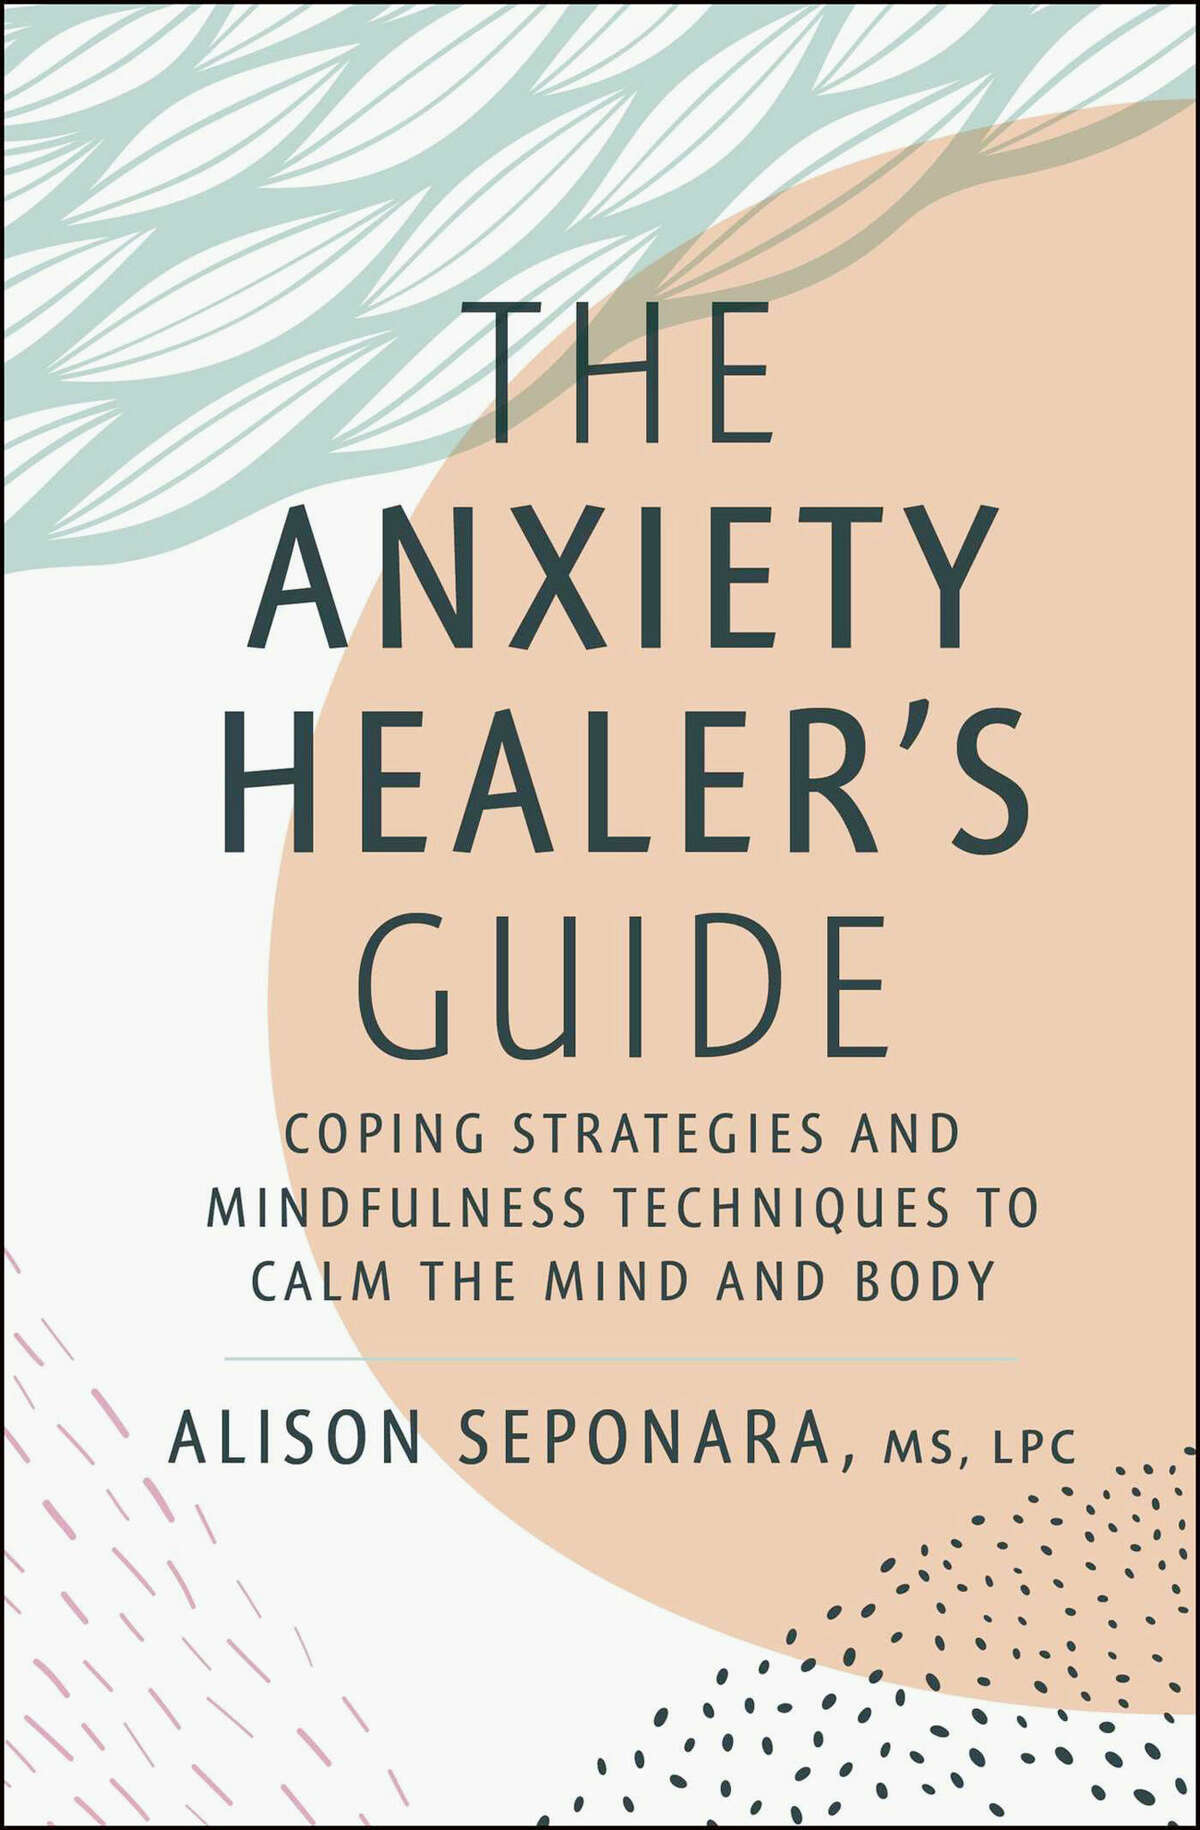 "The Anxiety Healer's Guide"